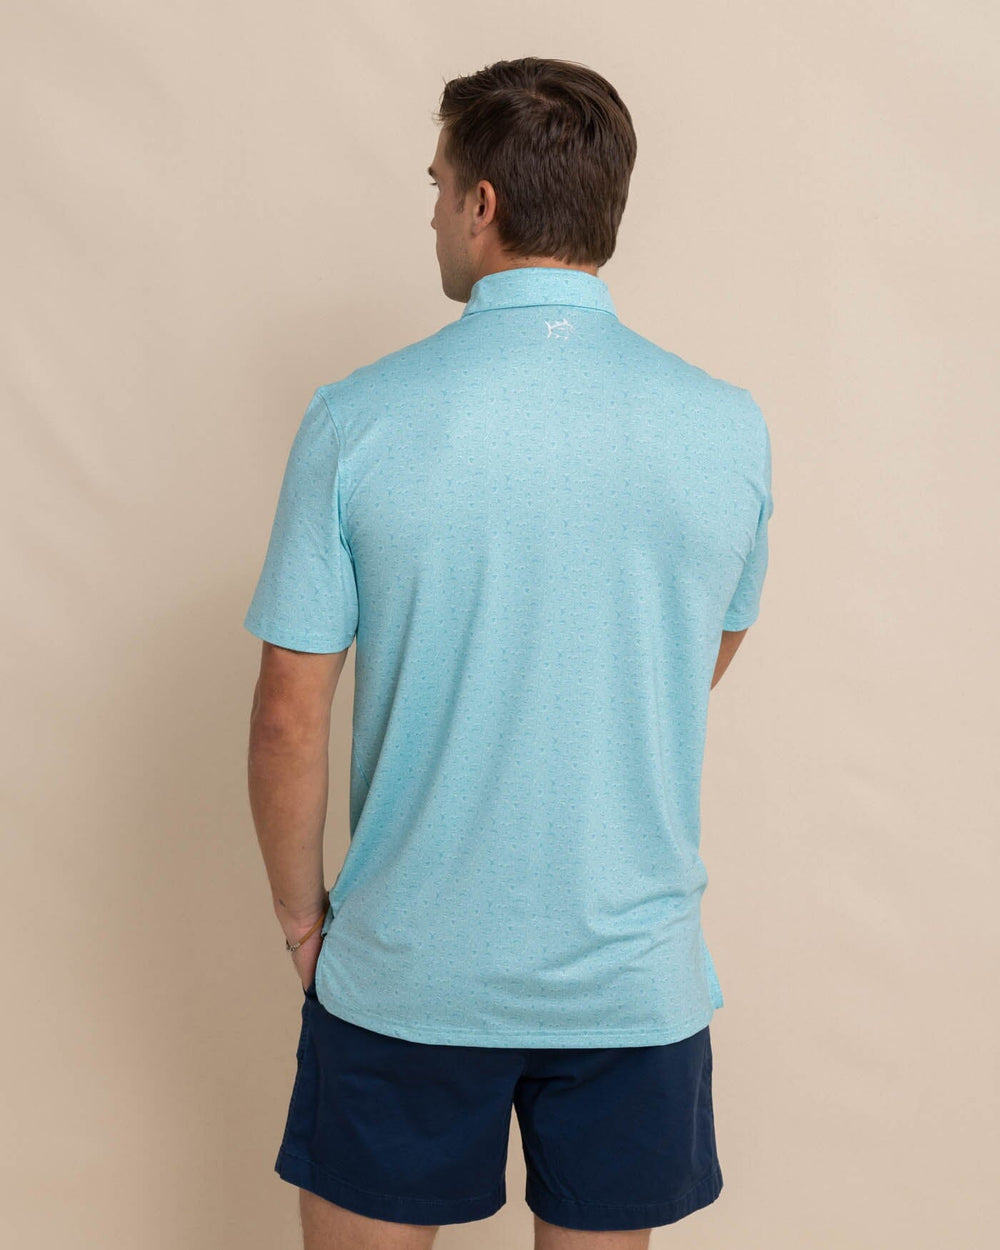 The back view of the Southern Tide Driver Let's Go Clubbing Printed Polo by Southern Tide - Ocean Aqua